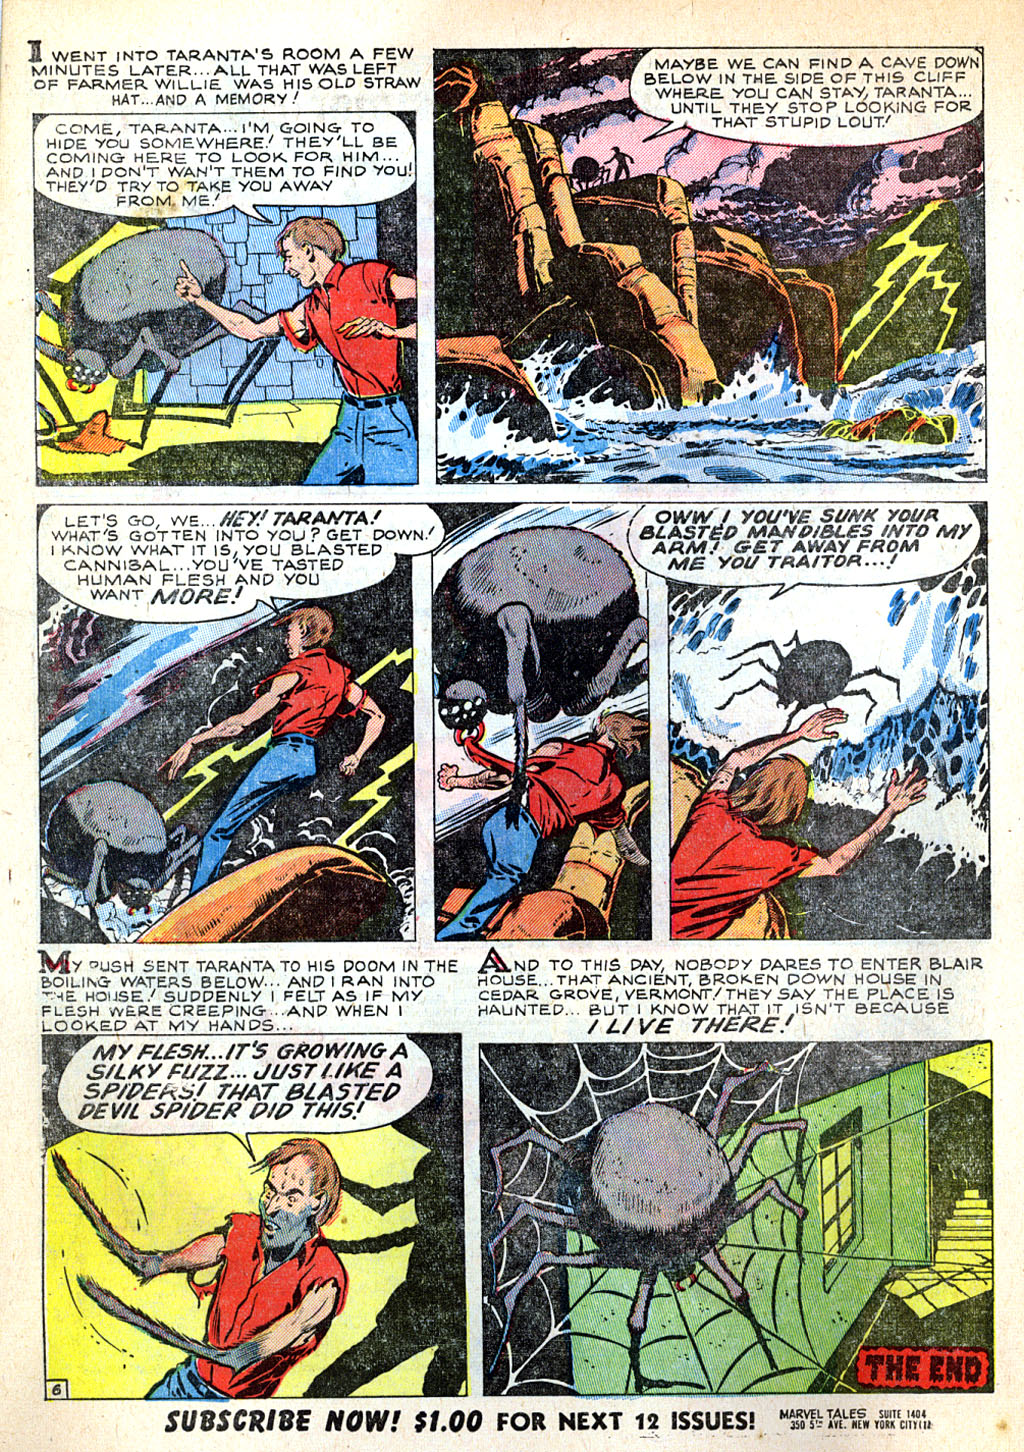 Marvel Tales (1949) 101 Page 15